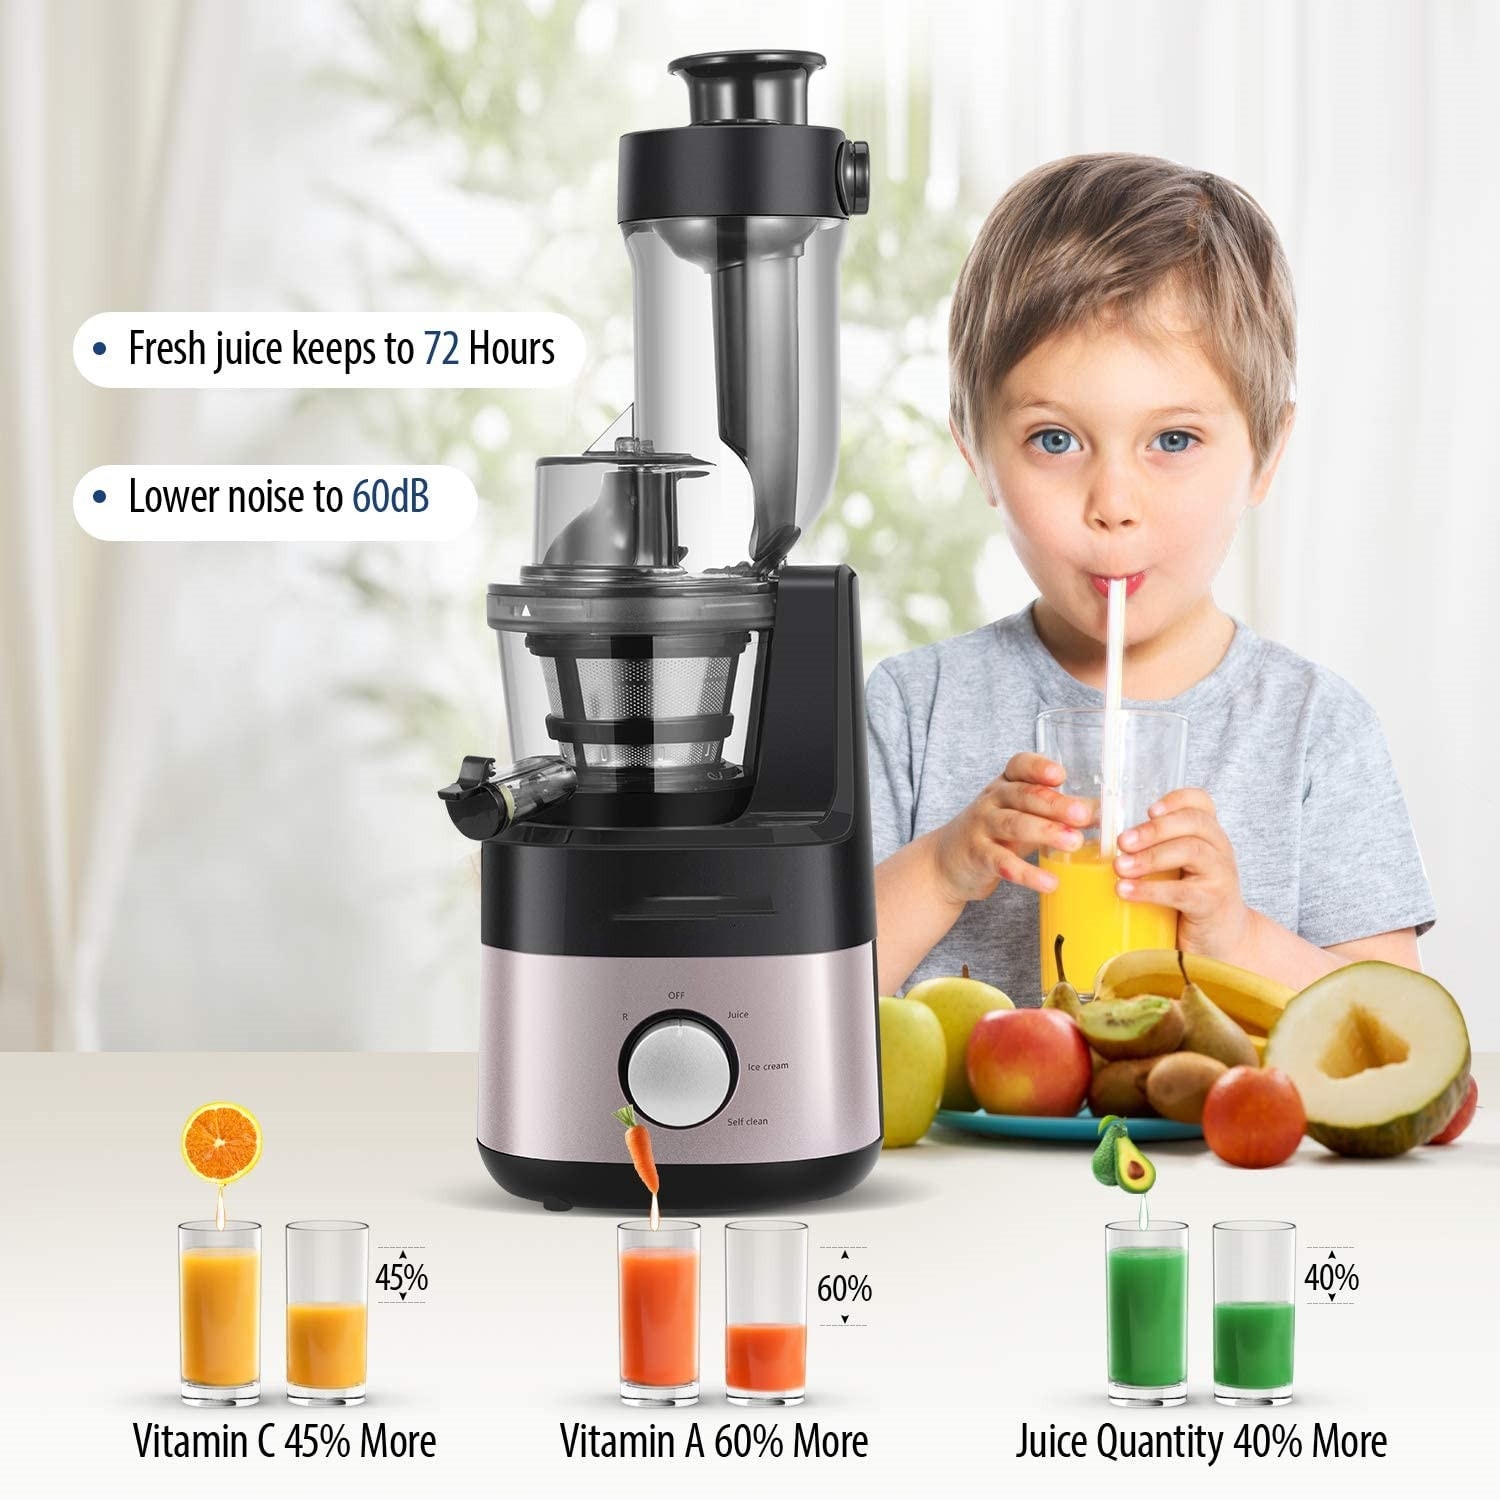 Free Slow Jucier with Ice Cream Maker Function. Masticating Juicer,  Reverse, Rose Gold - Rose Gold